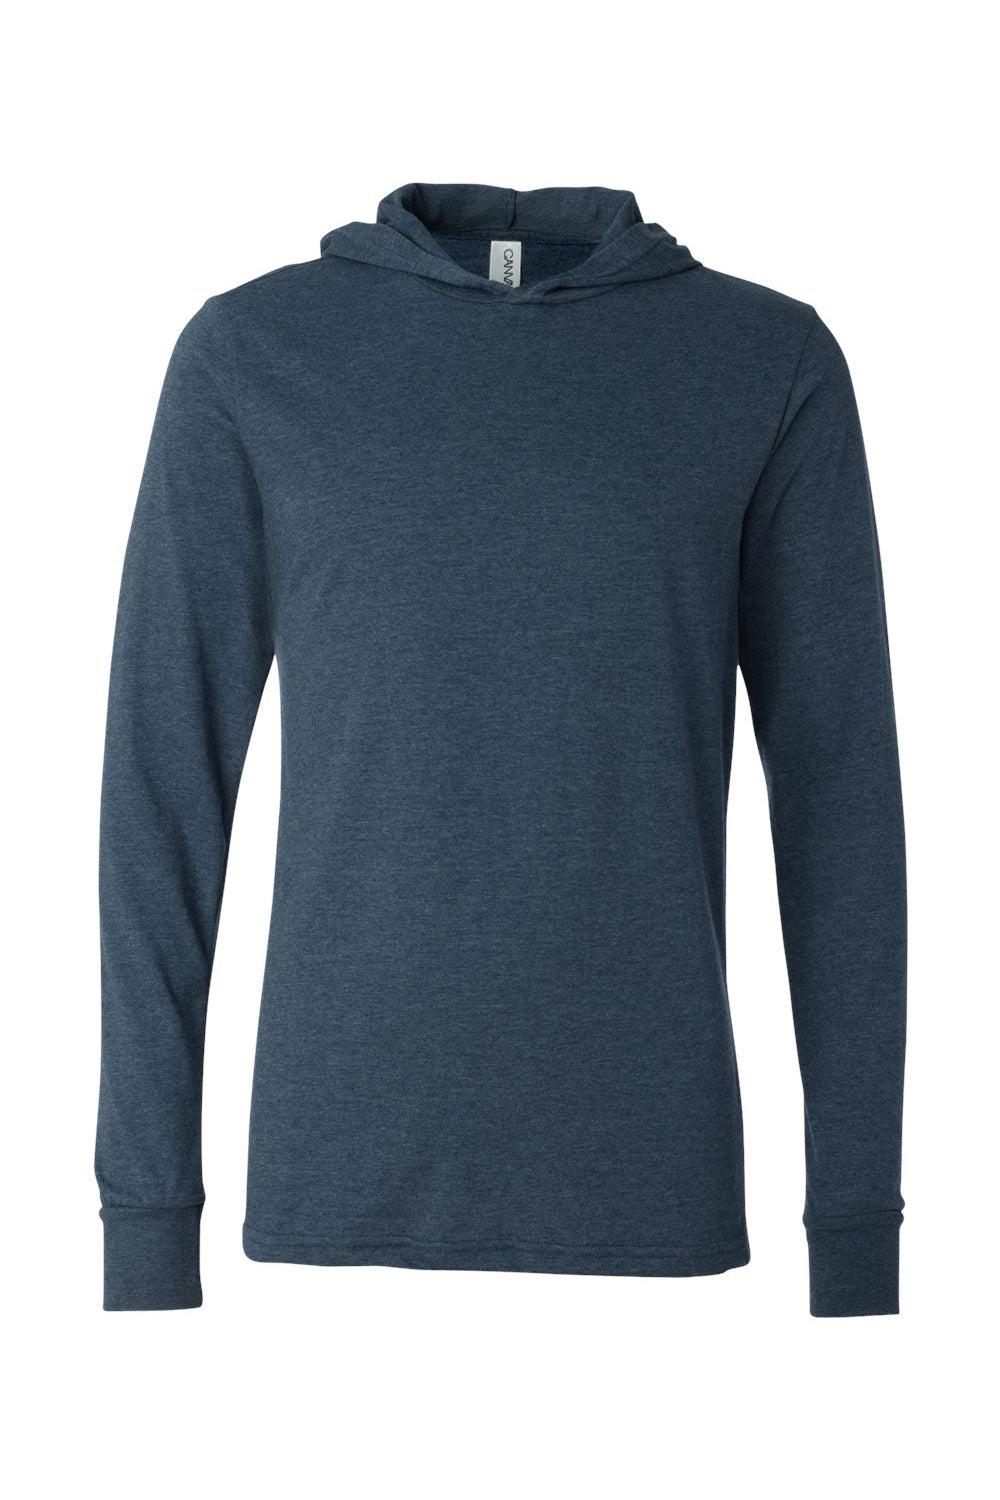 Bella + Canvas BC3512/3512 Mens Jersey Long Sleeve Hooded T-Shirt Hoodie Heather Navy Blue Flat Front